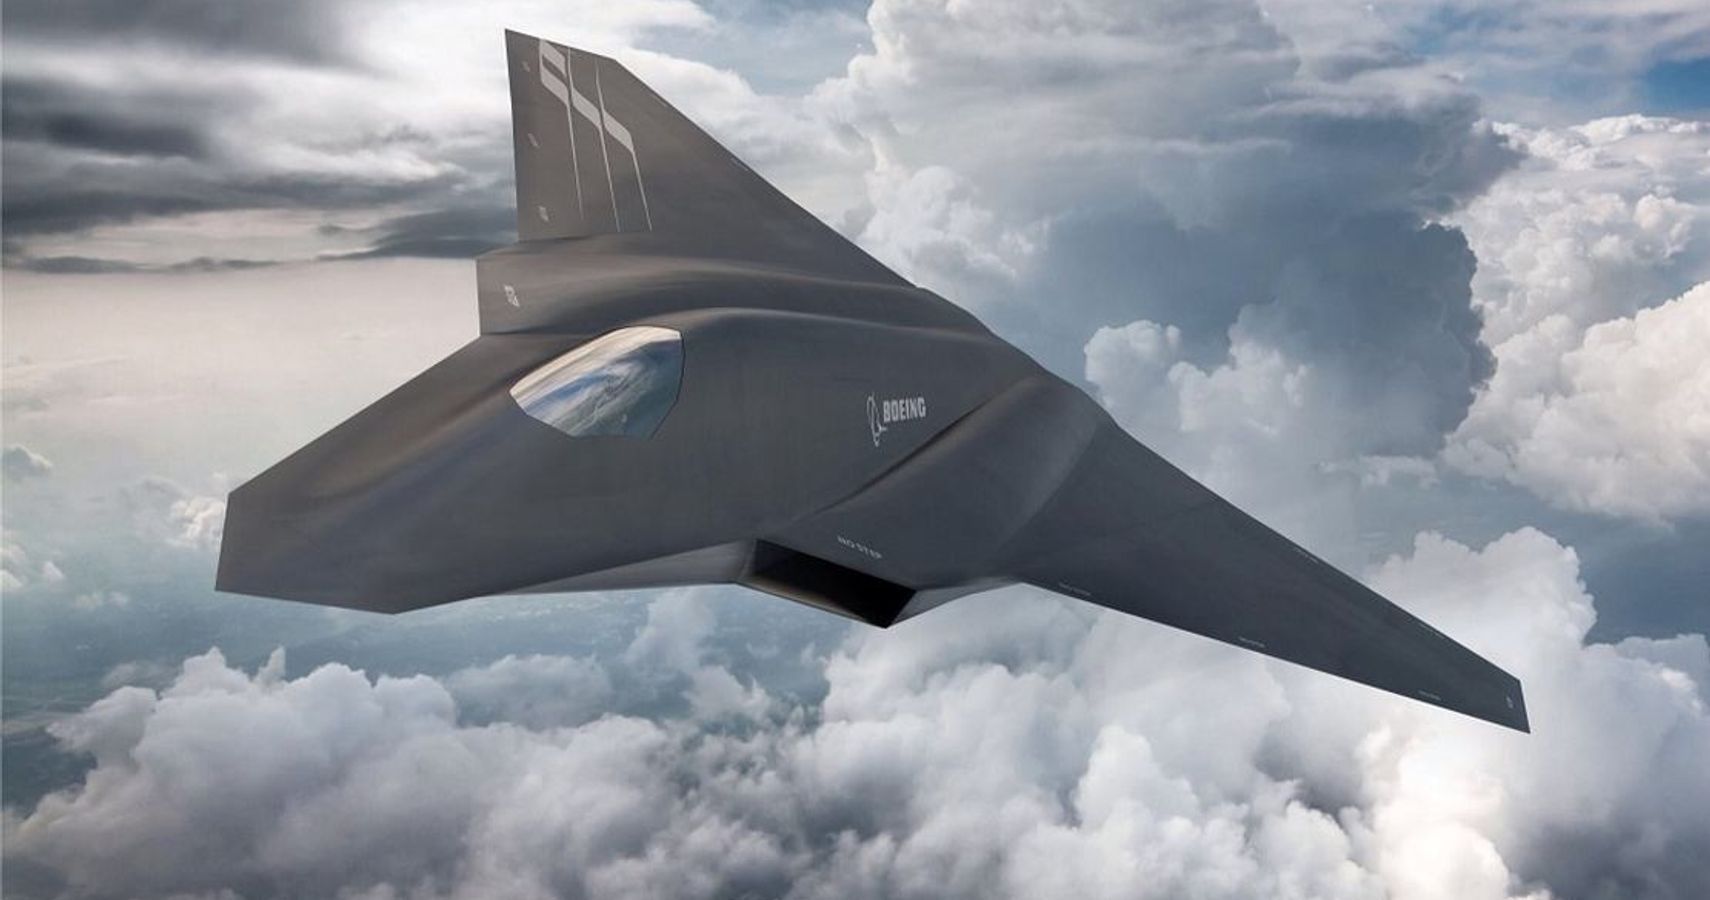 The Us Air Force Has New Fighter Jet They Built In A Year Spikey Bits